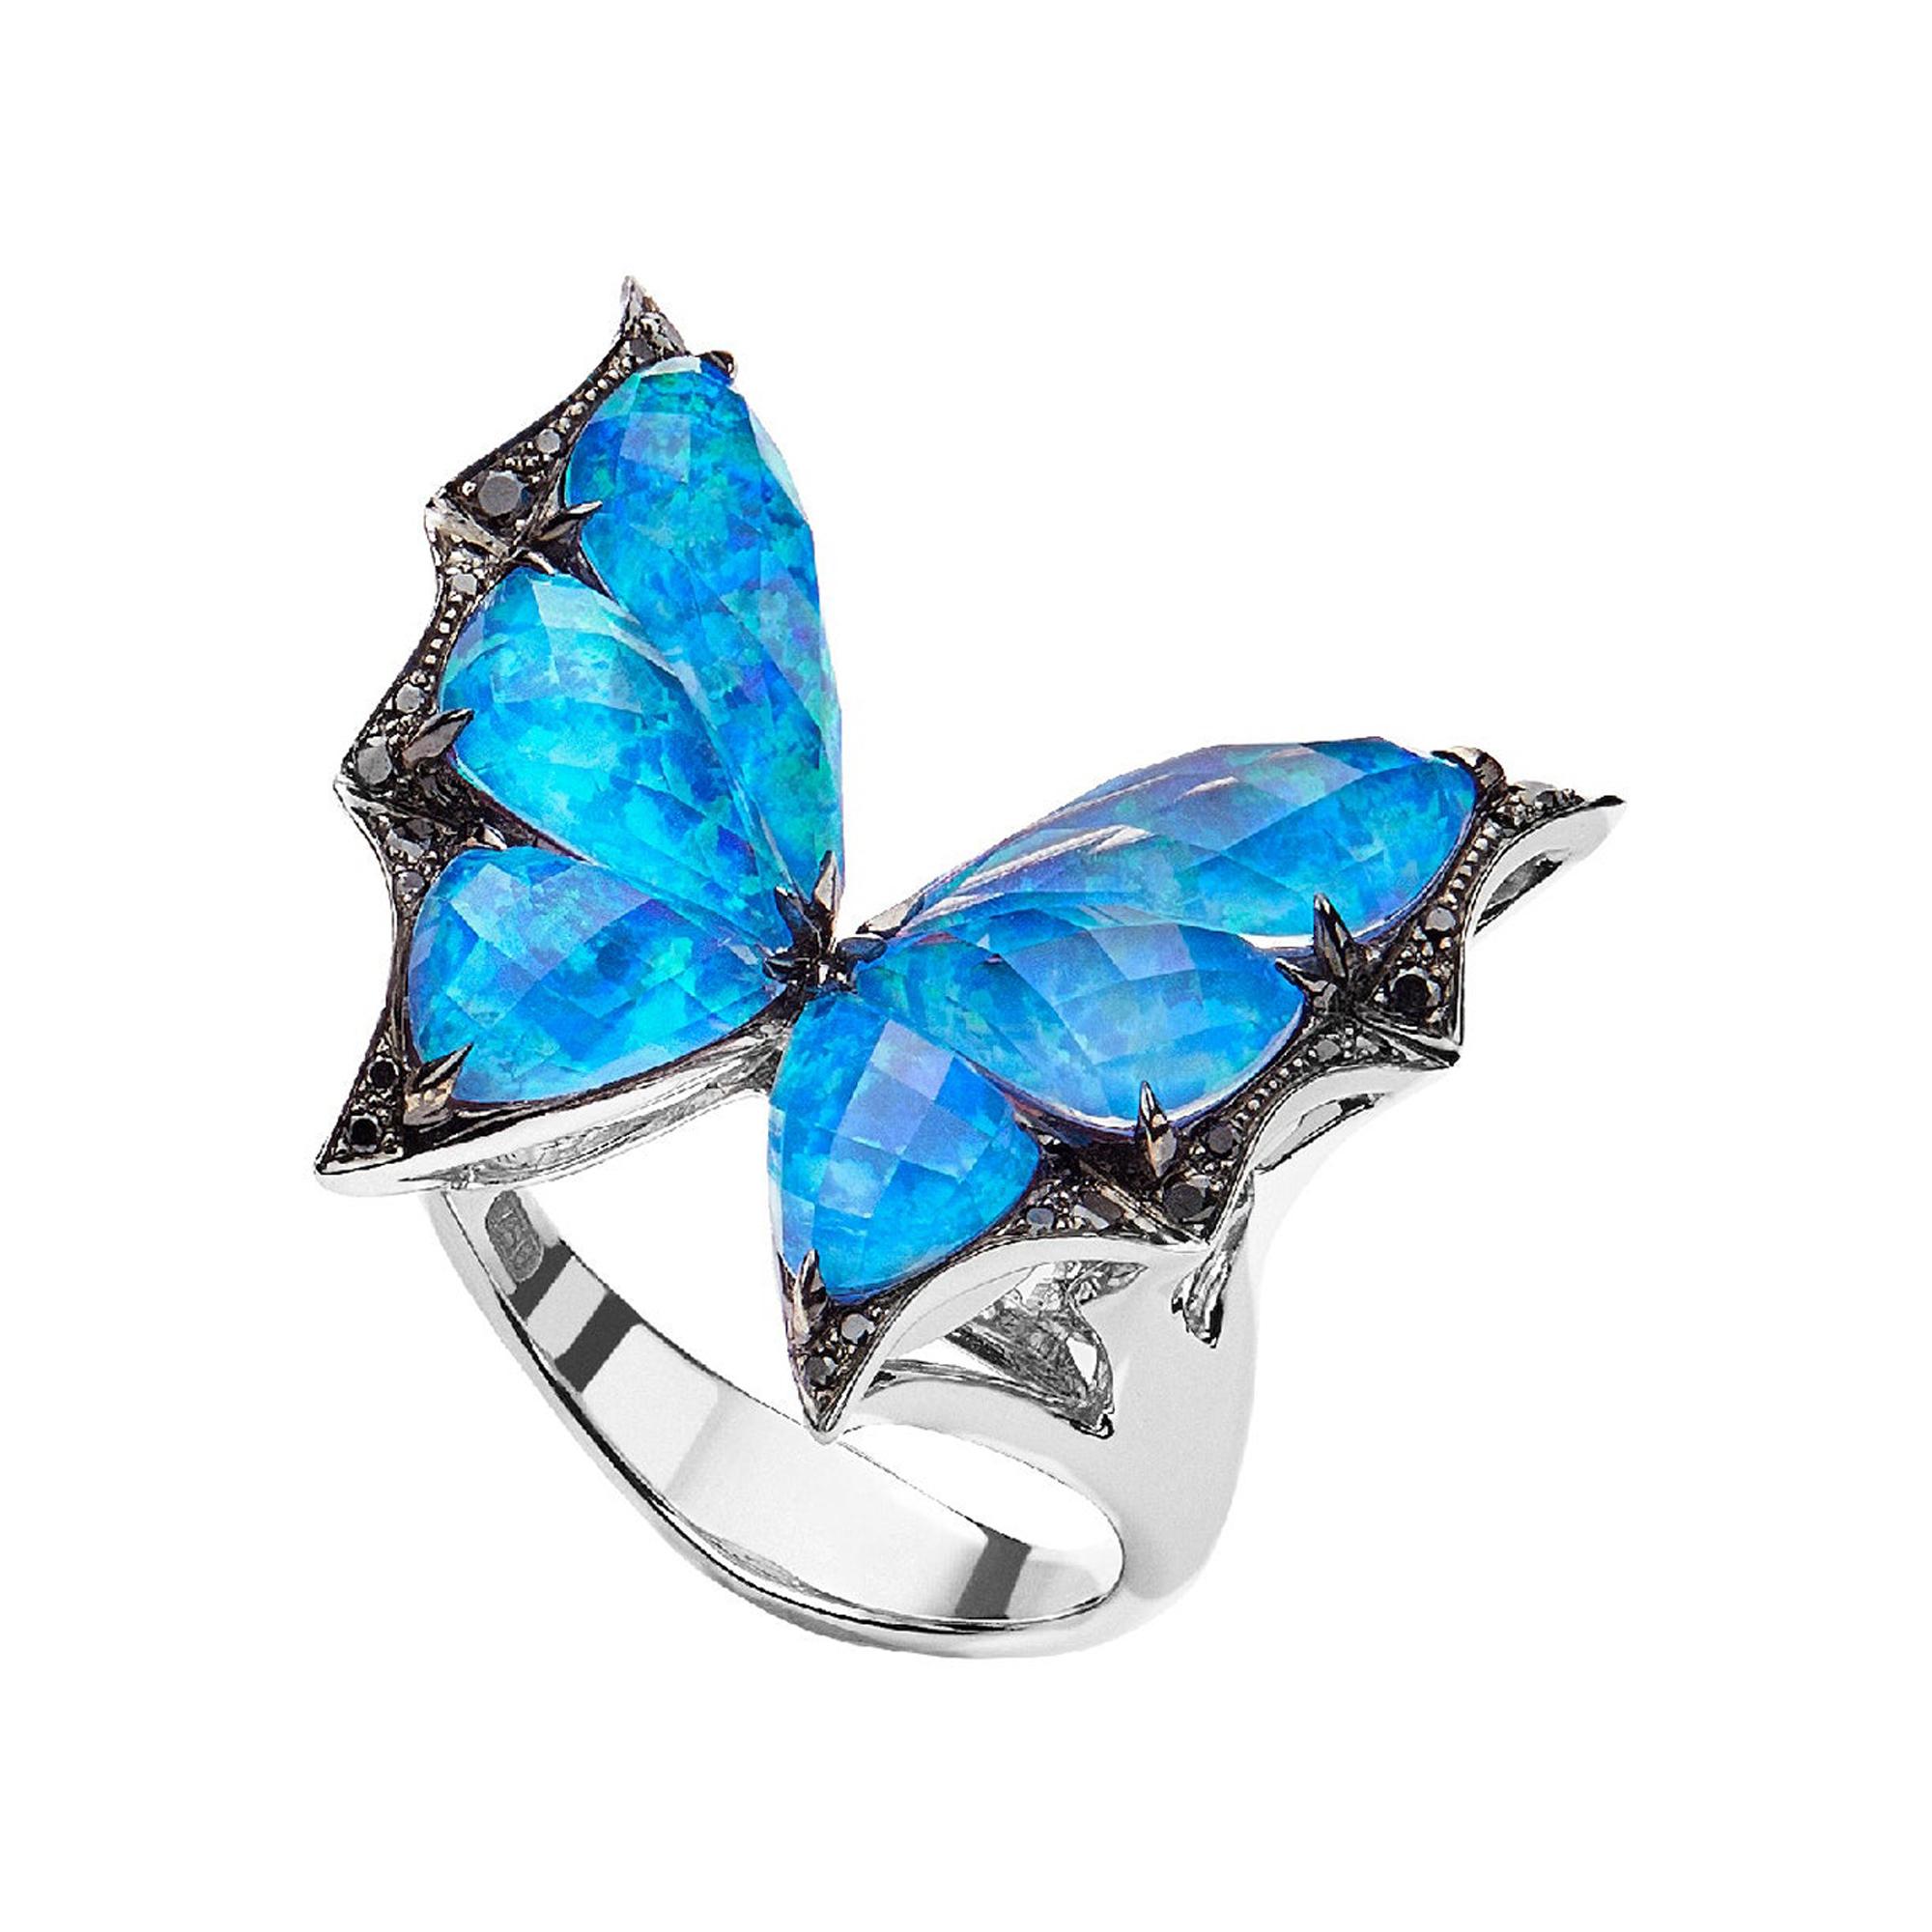 Stephen Webster Fly by Night Black Opalescent Crystal Haze and Diamond Ring